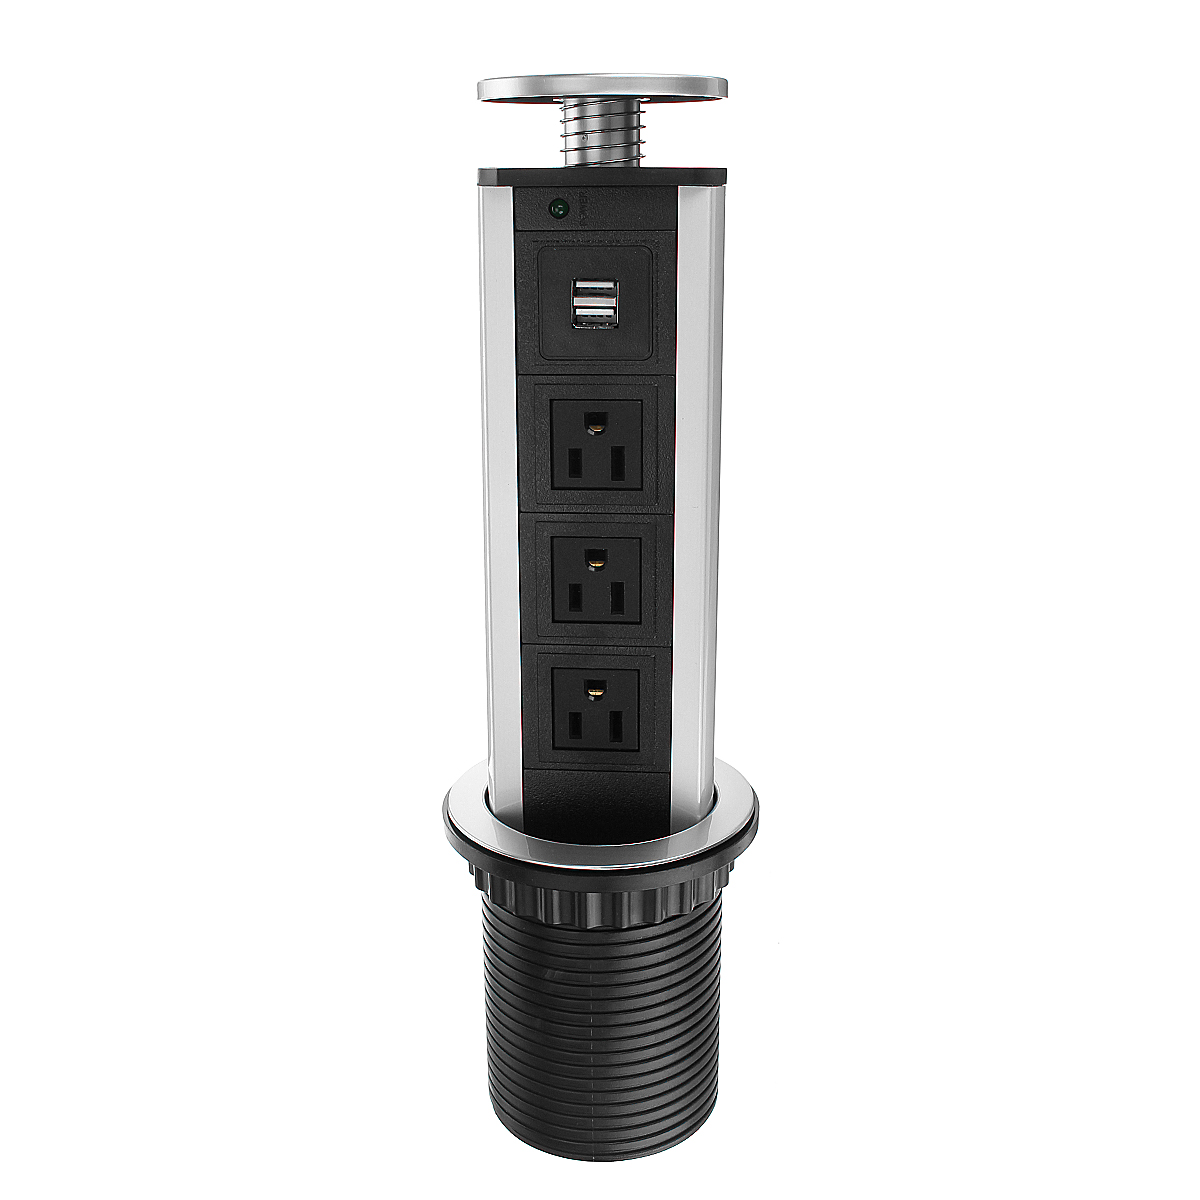 2500W-US-Plug-3456-Socket-Power-25A-USB-Charger-Hidden-Kitchen-Table-Electrical-Socket-1602744-3